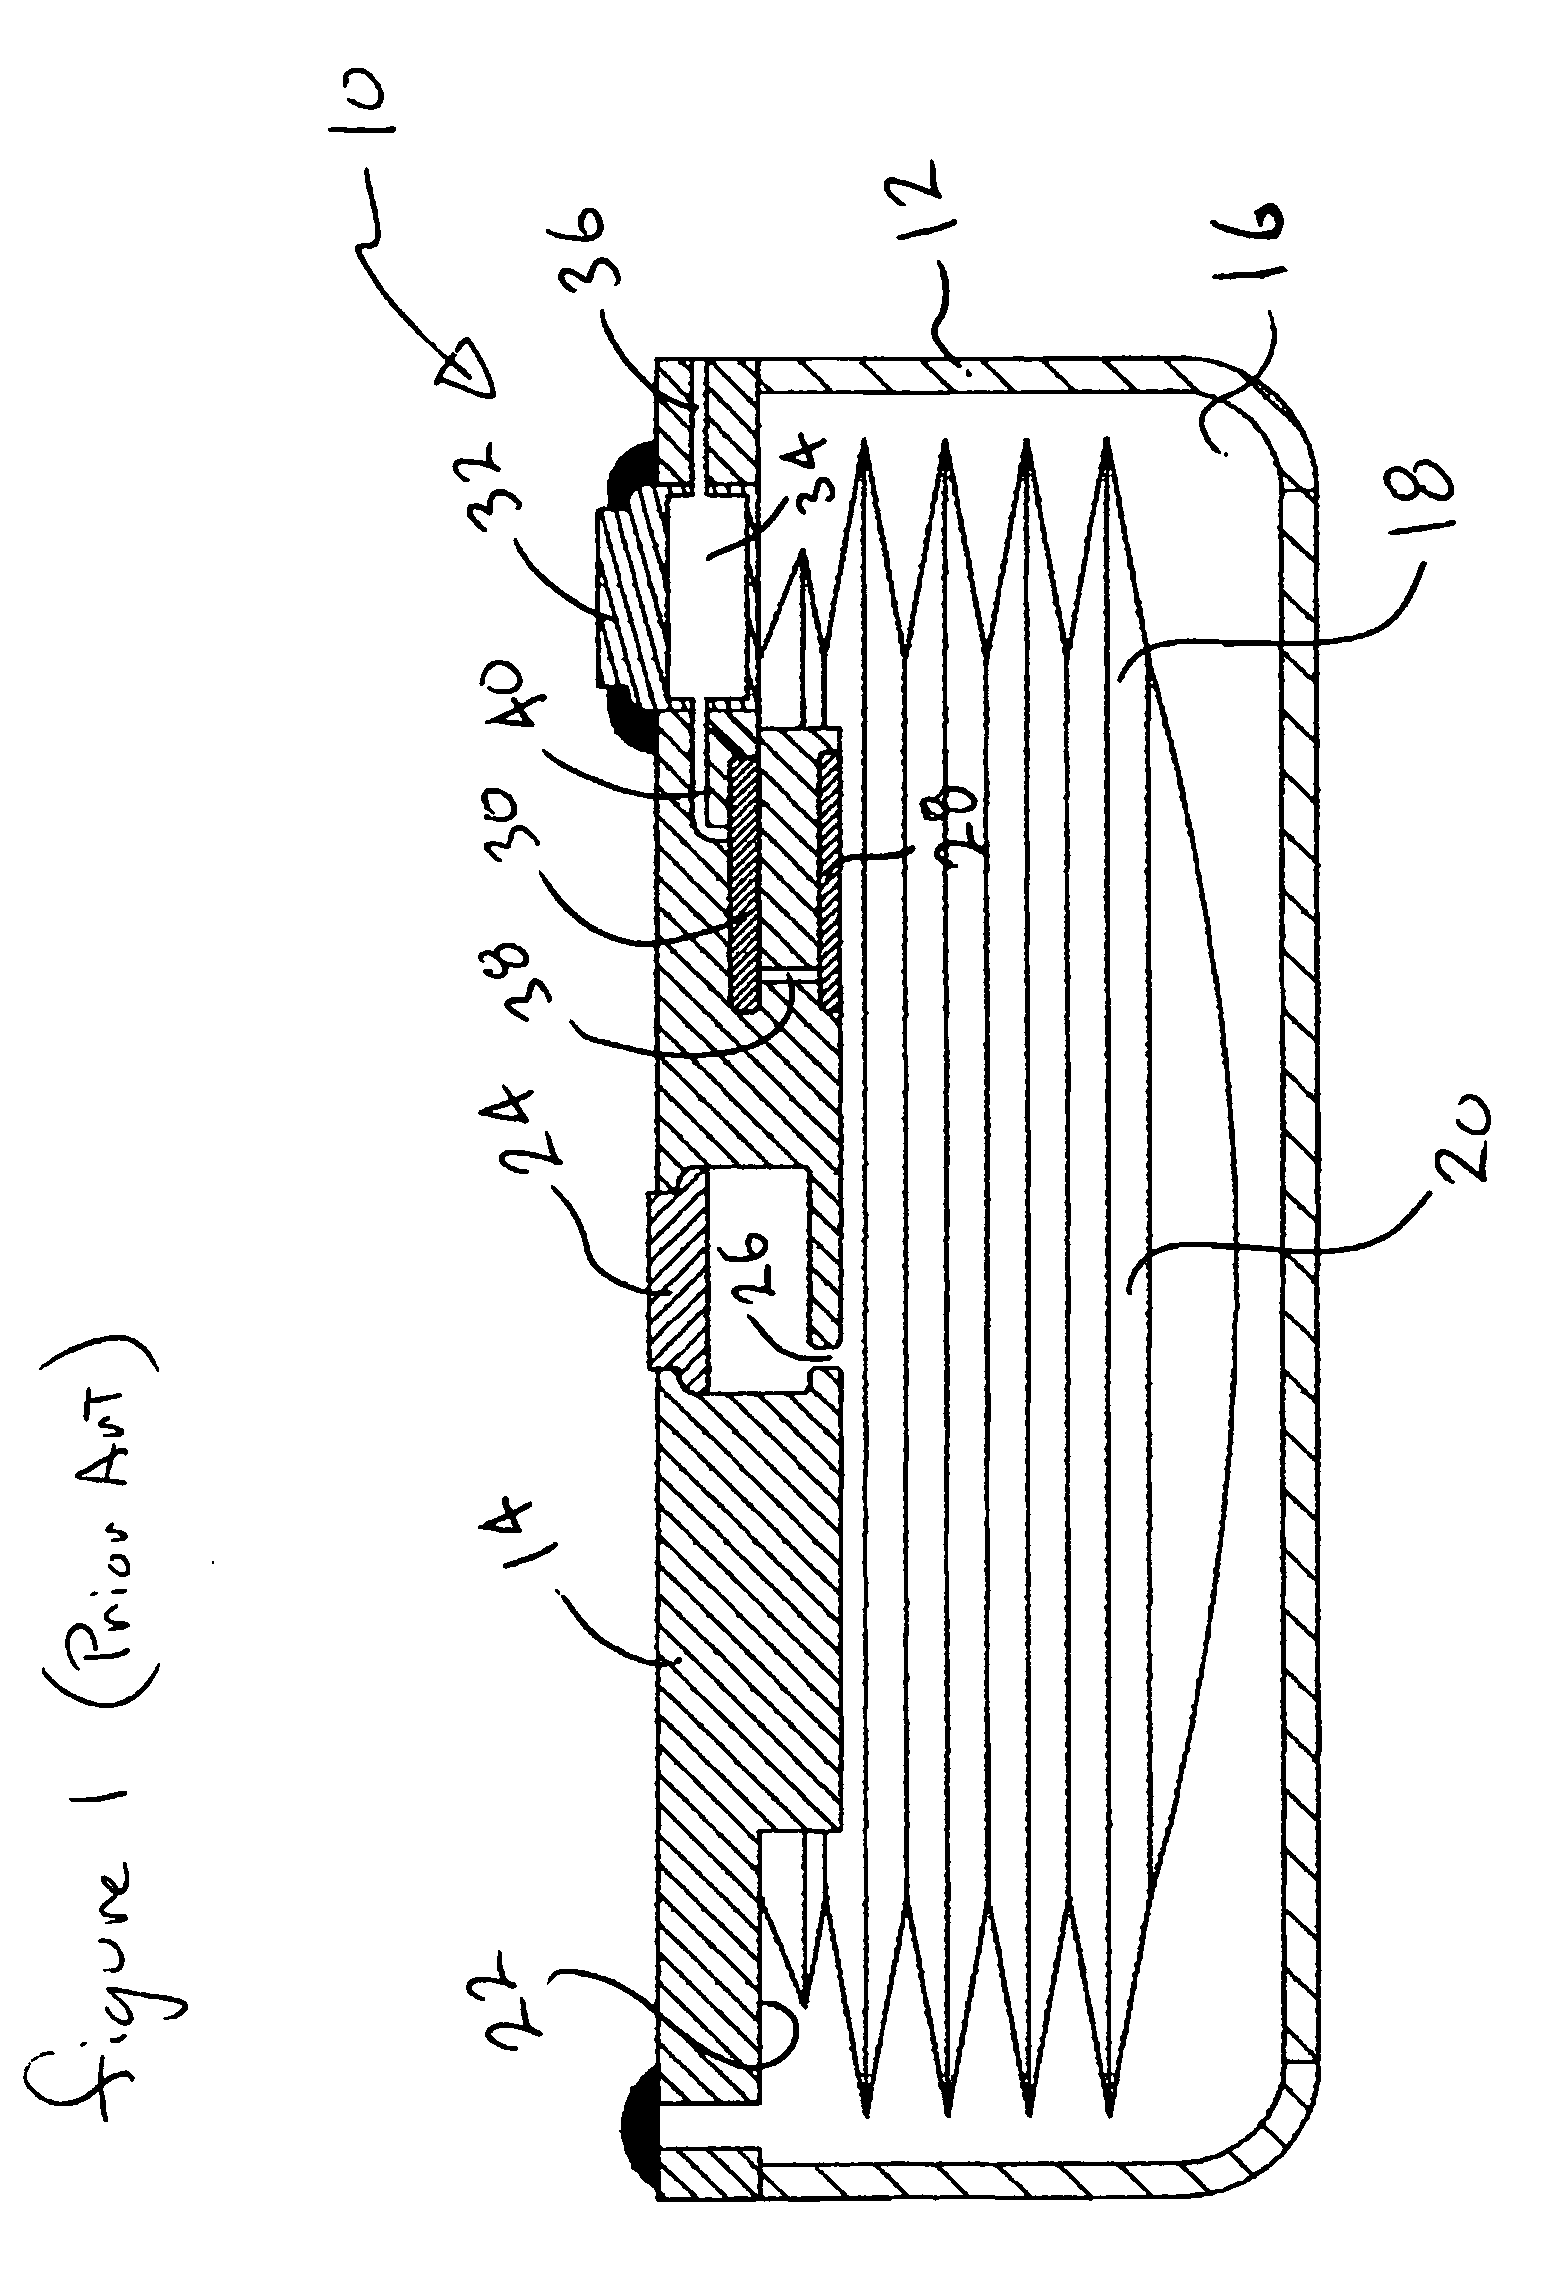 Fluidic capillary chip for regulating drug flow rates of infusion pumps